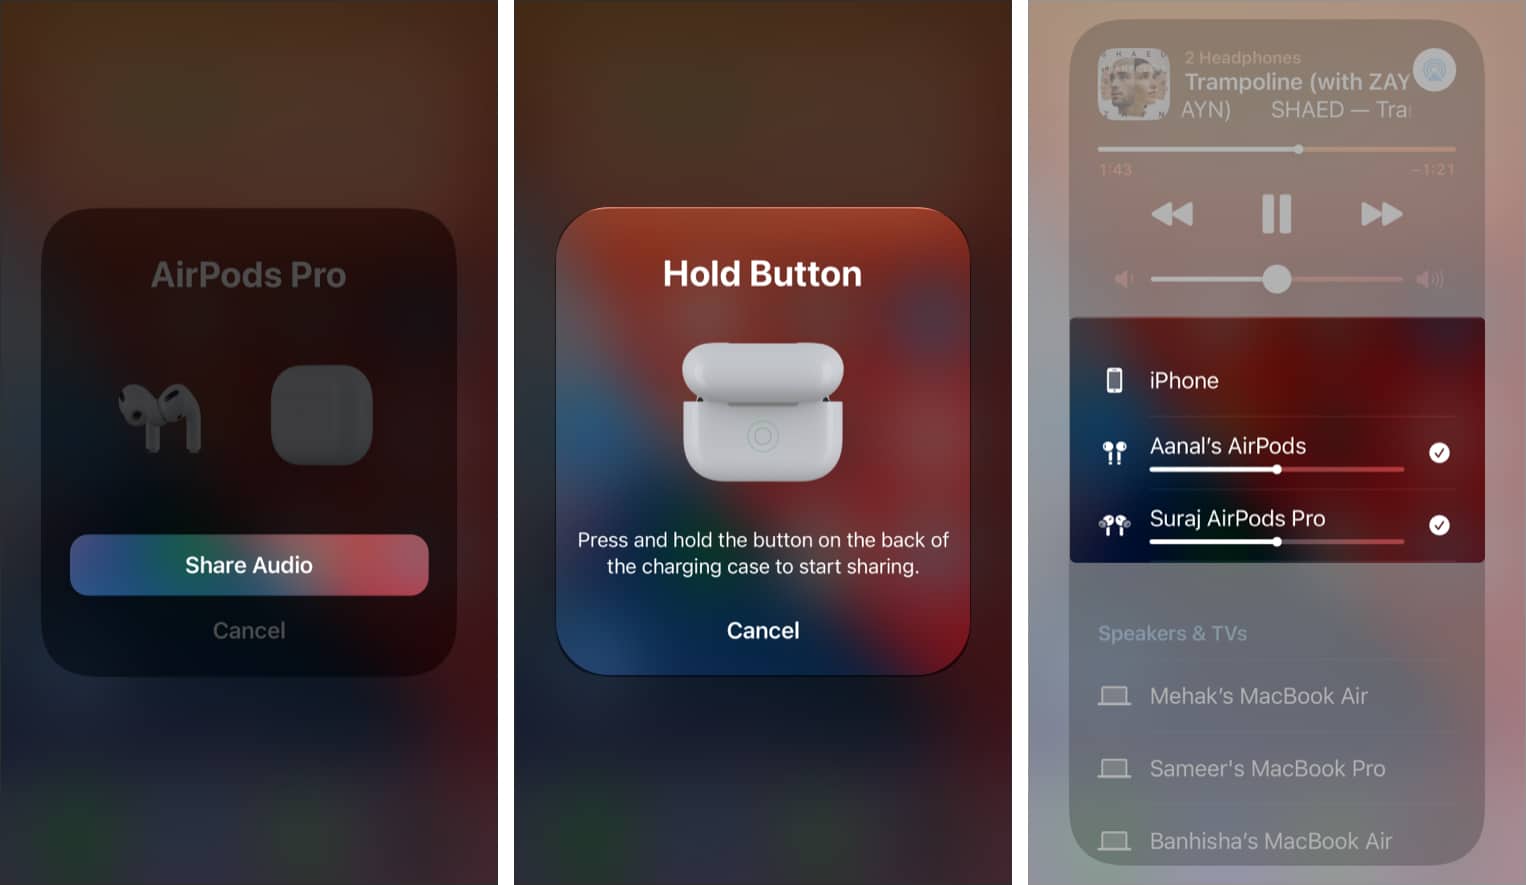 Connect two AirPods to an iPhone